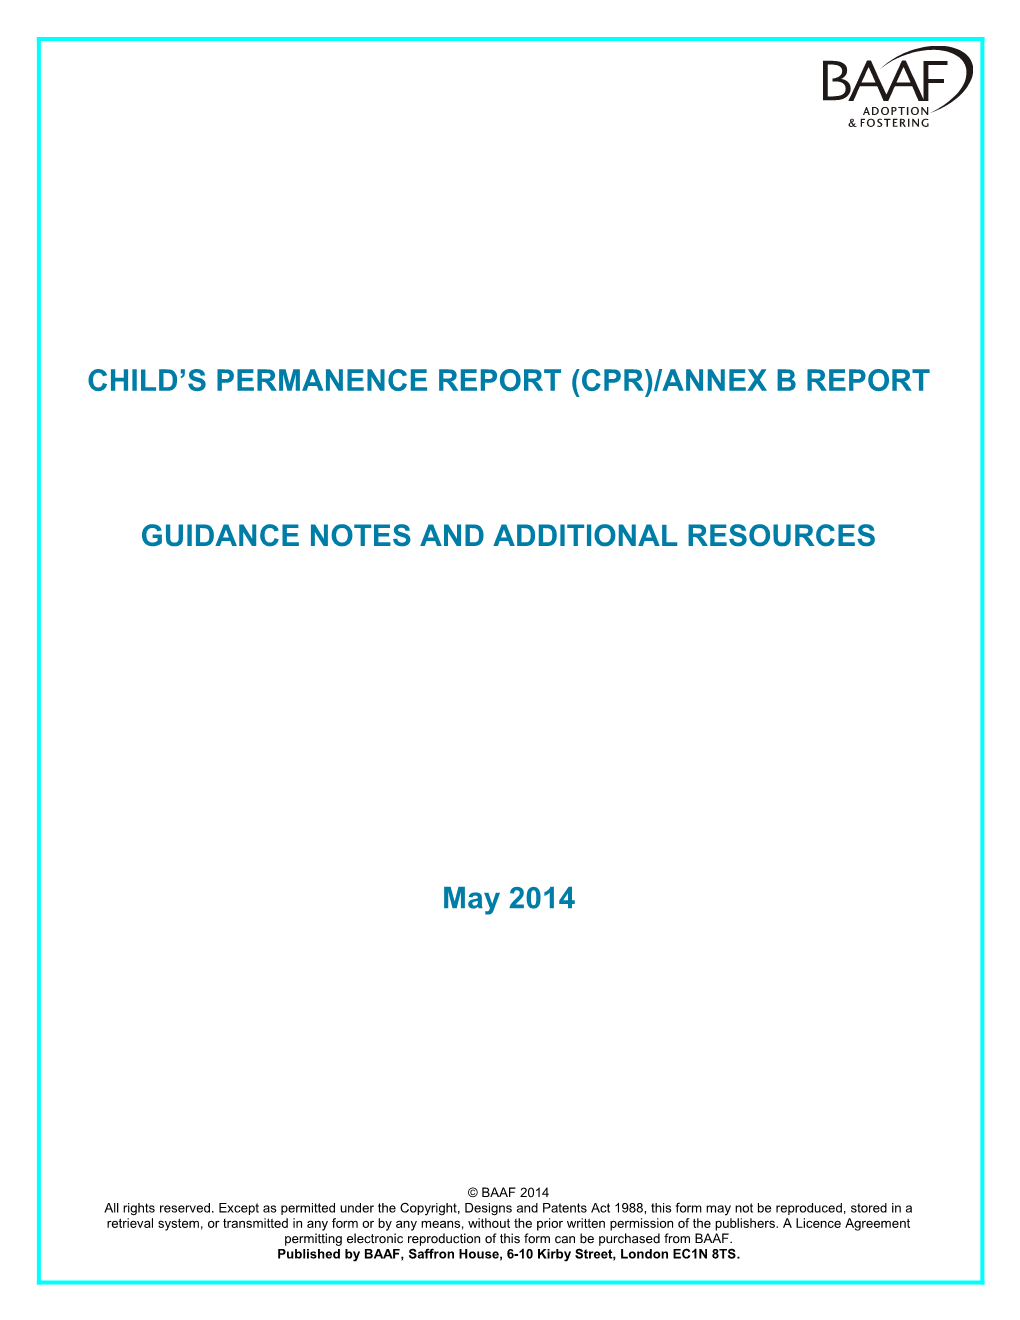 Childs Permanence Report (Cpr) Guidance Notes and Additional Resources